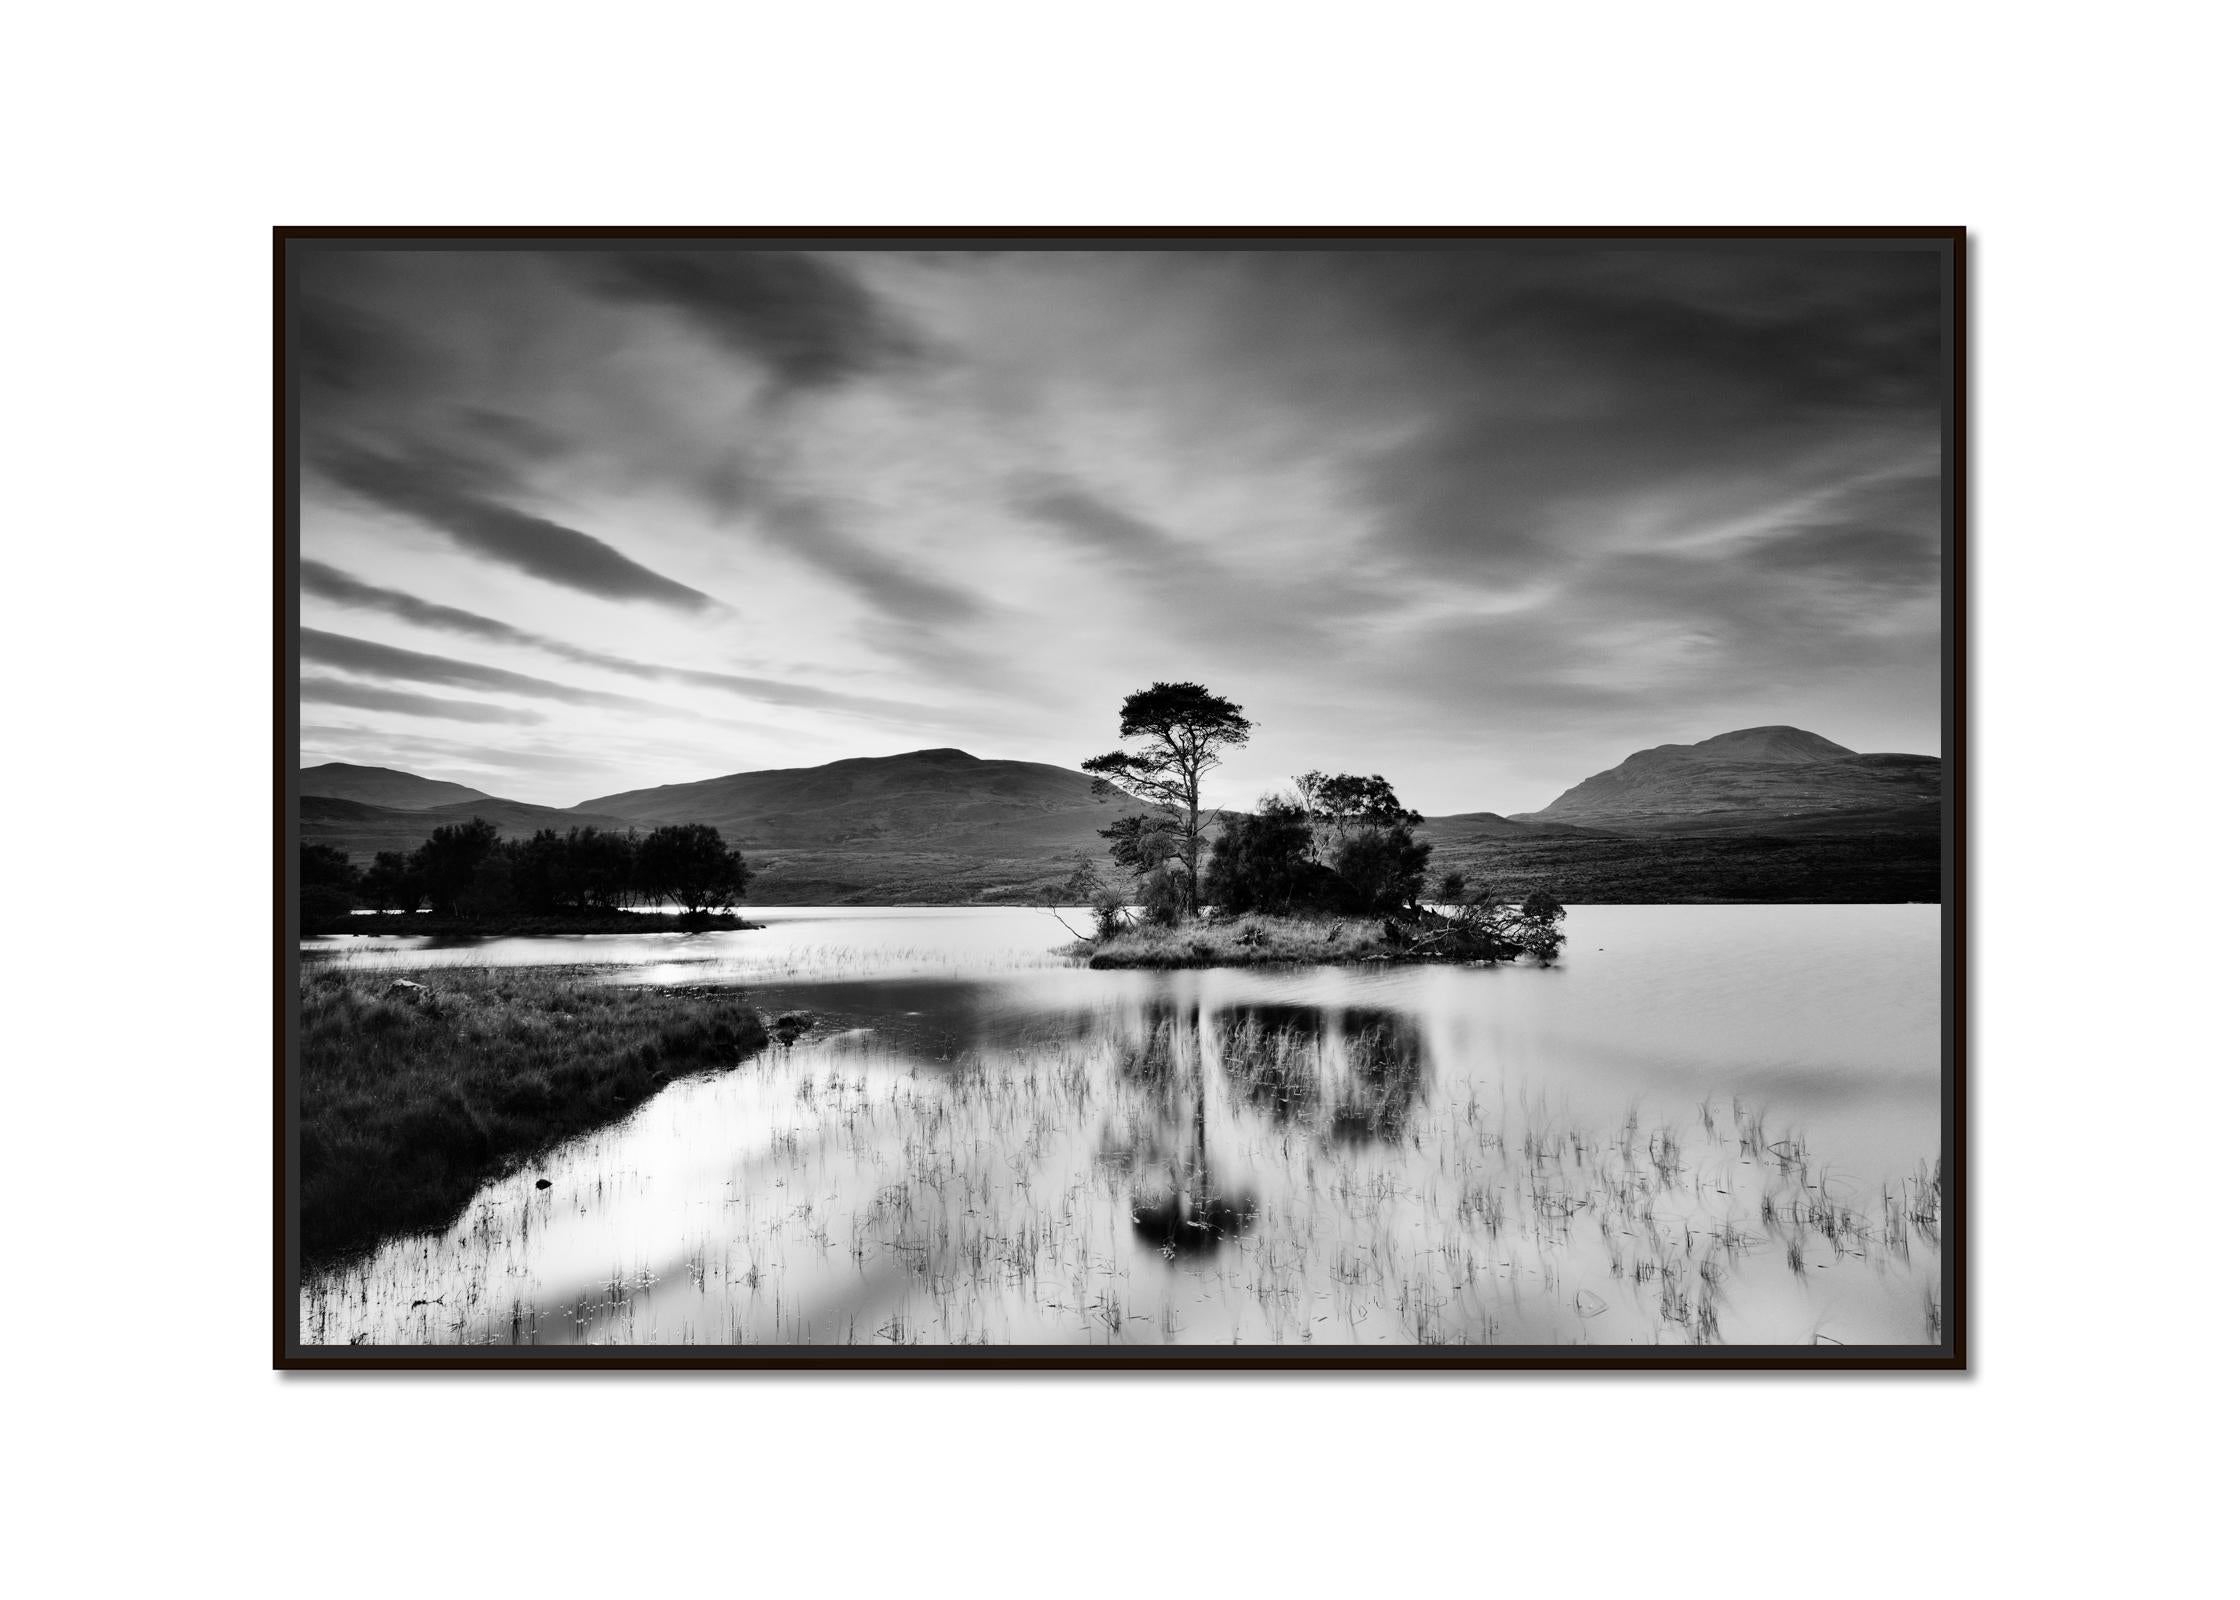 After the Sunset Tree Island Mountain Lake Scotland B&W landscape photography - Photograph by Gerald Berghammer